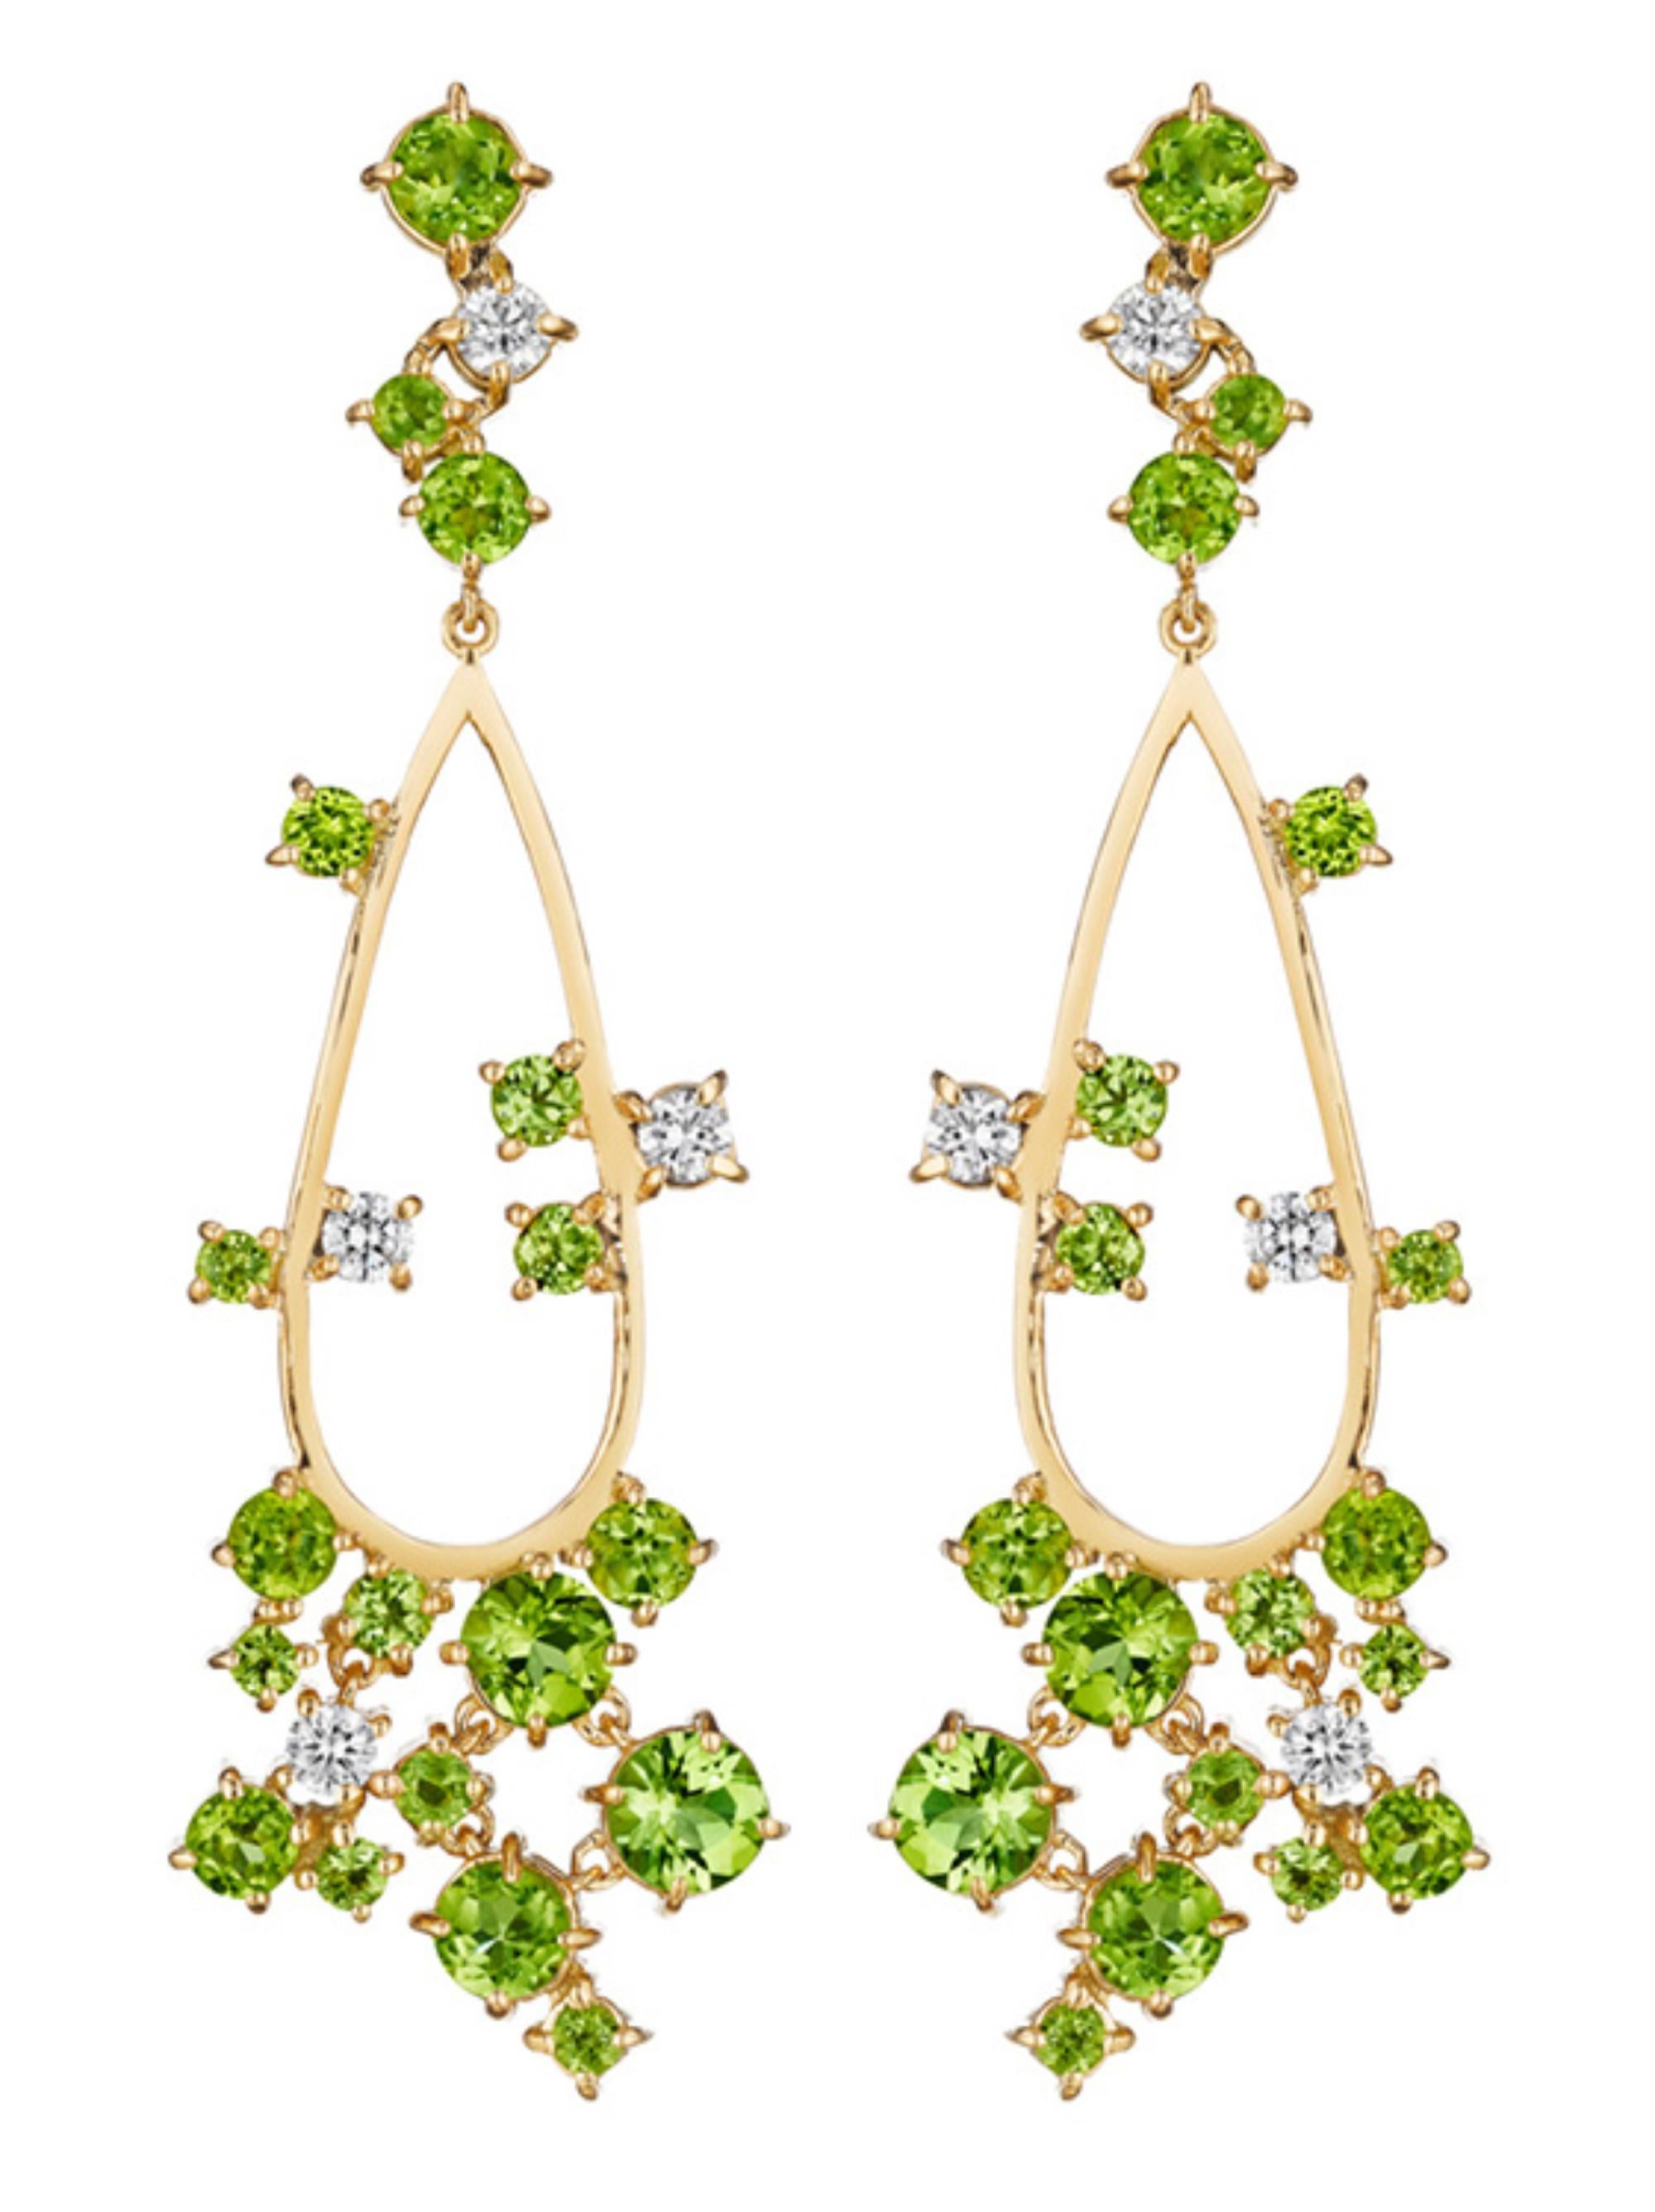 Specs: 18k yellow gold Melting Ice earrings with 2.50 carats of peridot and 0.30 carats of diamonds. 

Story: The Melting Ice collection by MadStone designer Kerri Halpern draws influence from its colorful gemstones creating playful designs.